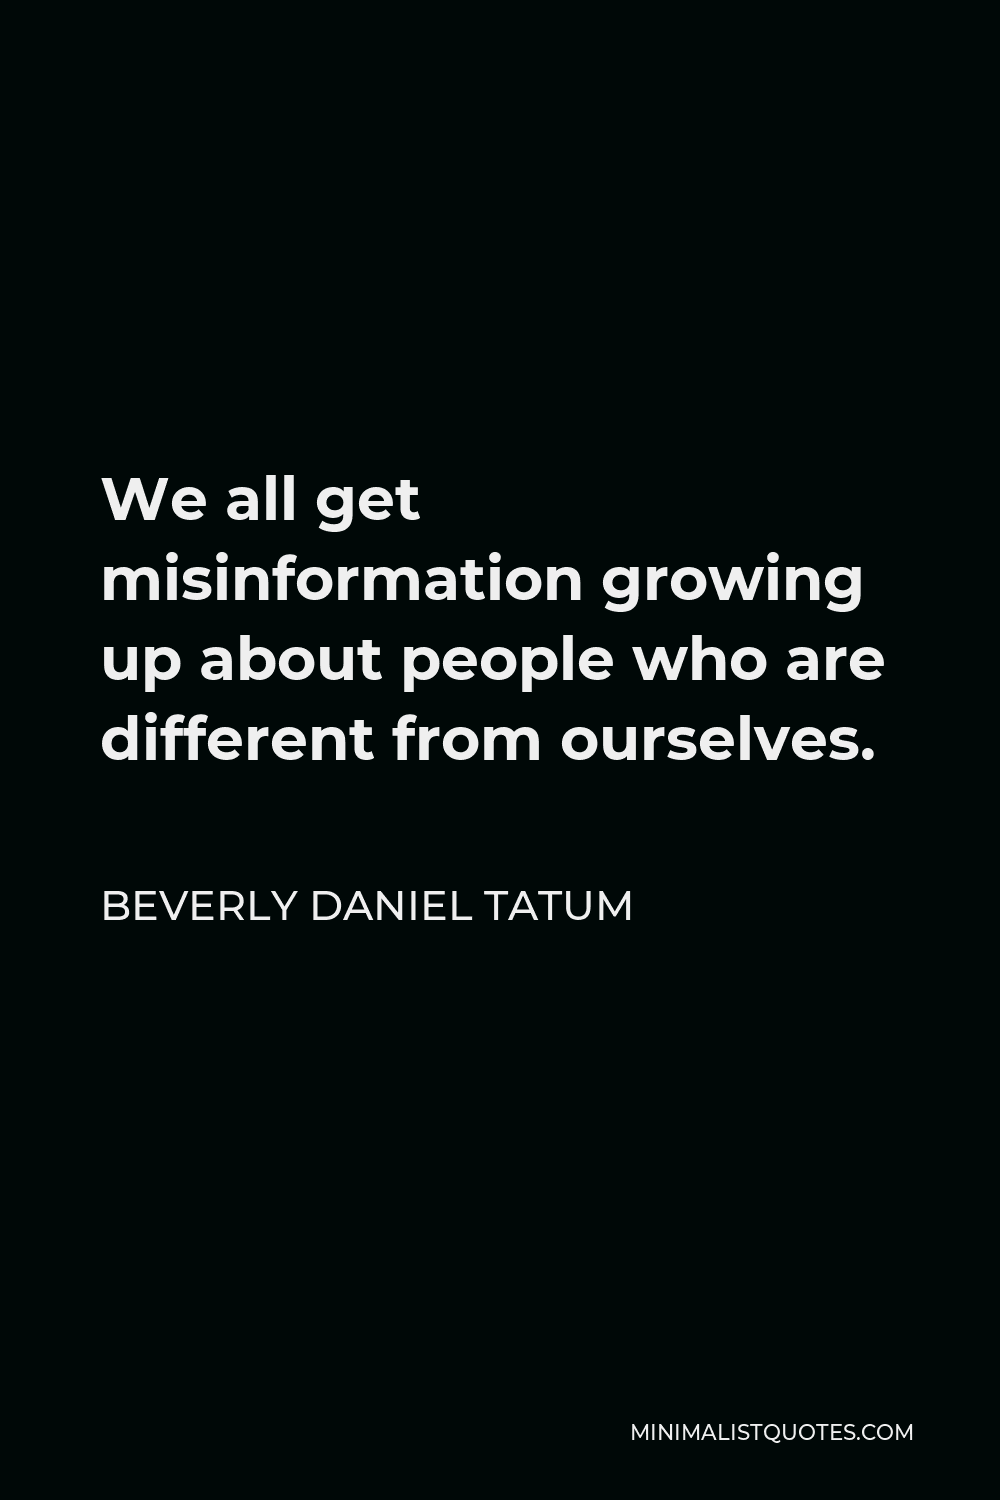 Beverly Daniel Tatum Quote - We all get misinformation growing up about people who are different from ourselves.